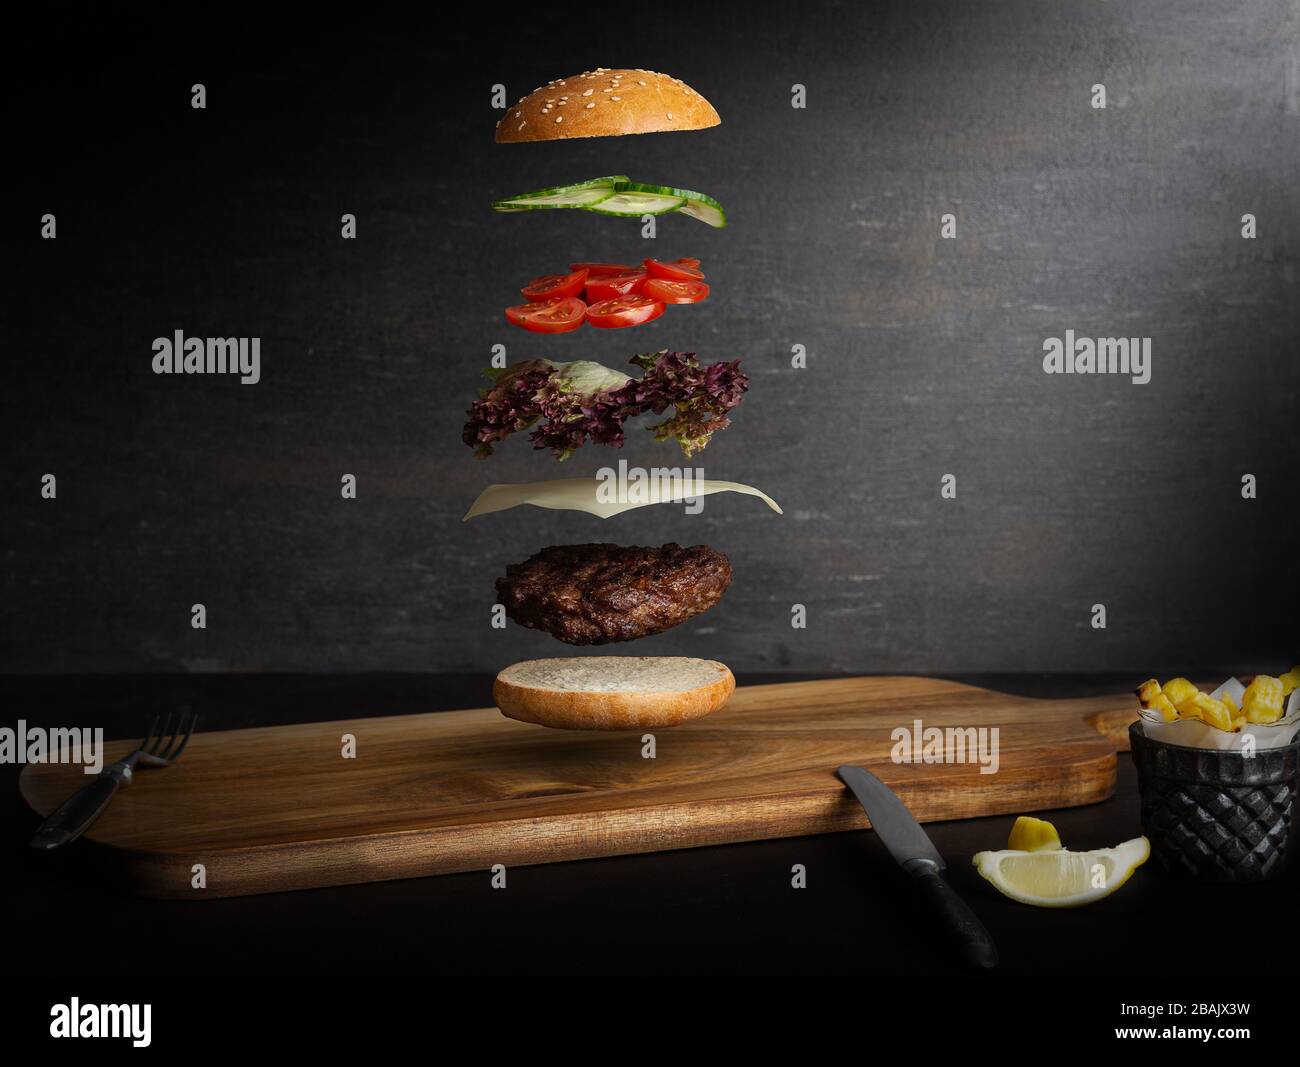 Meat burger with flying ingredients, isolated, with copyspace for text or logo, black background and bright colors Stock Photo